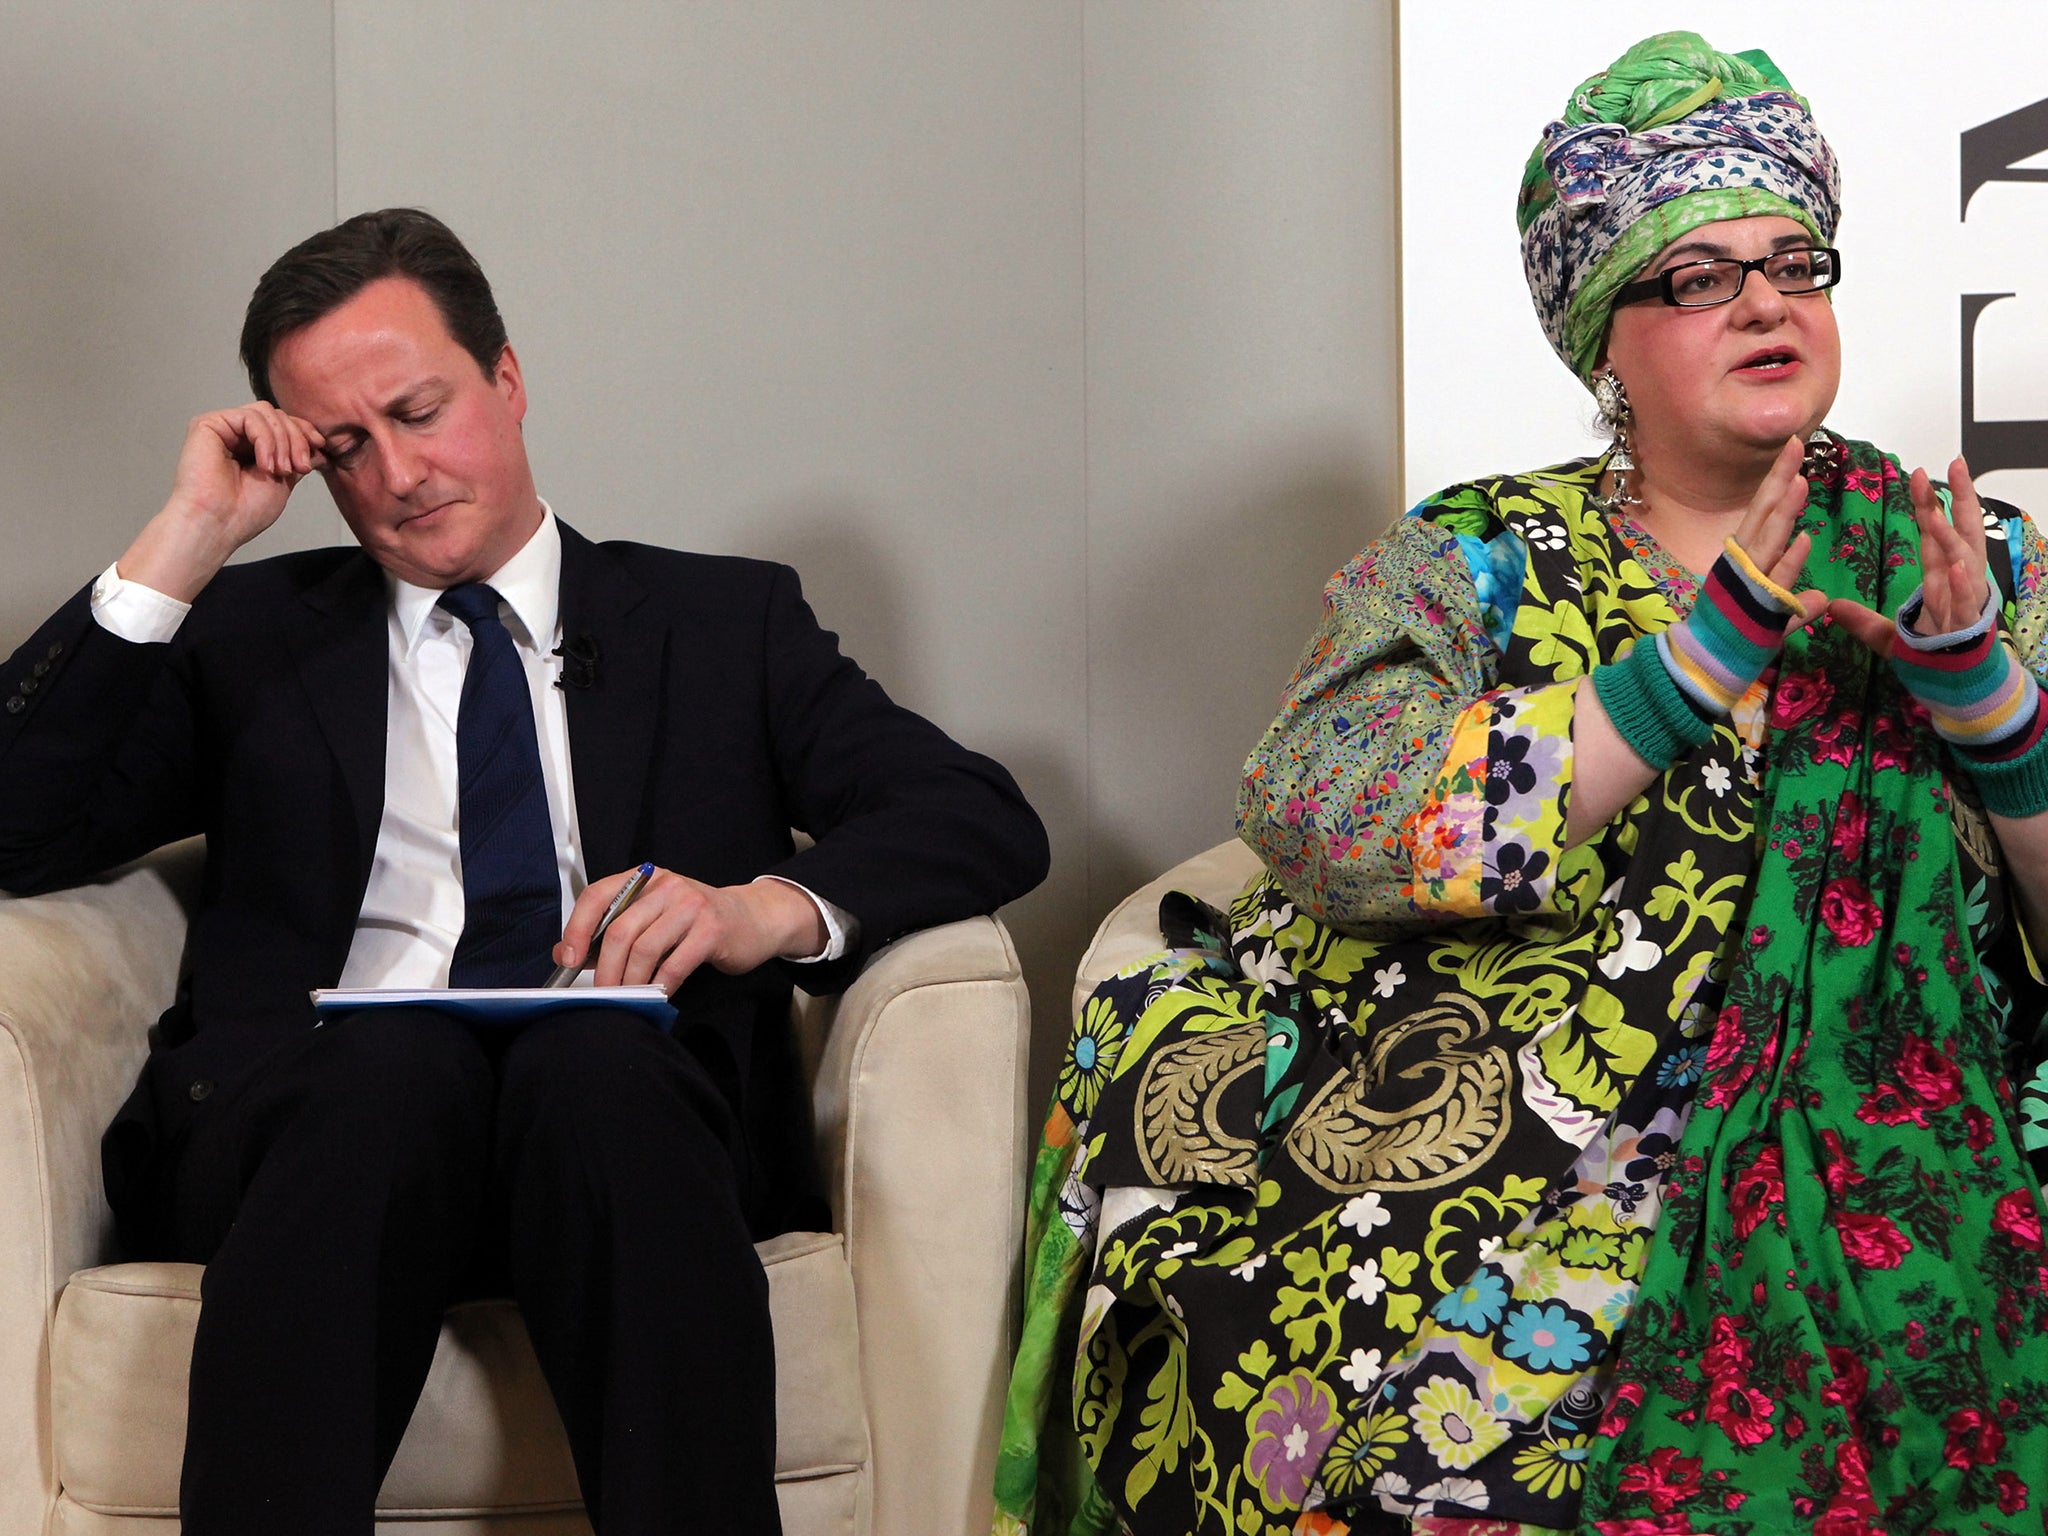 Camila Batmanghelidjh attending a Demos think tank event with David Cameron in 2010. The founder of Kids Company has accused politicians of playing “ugly Westminster games” (Ge